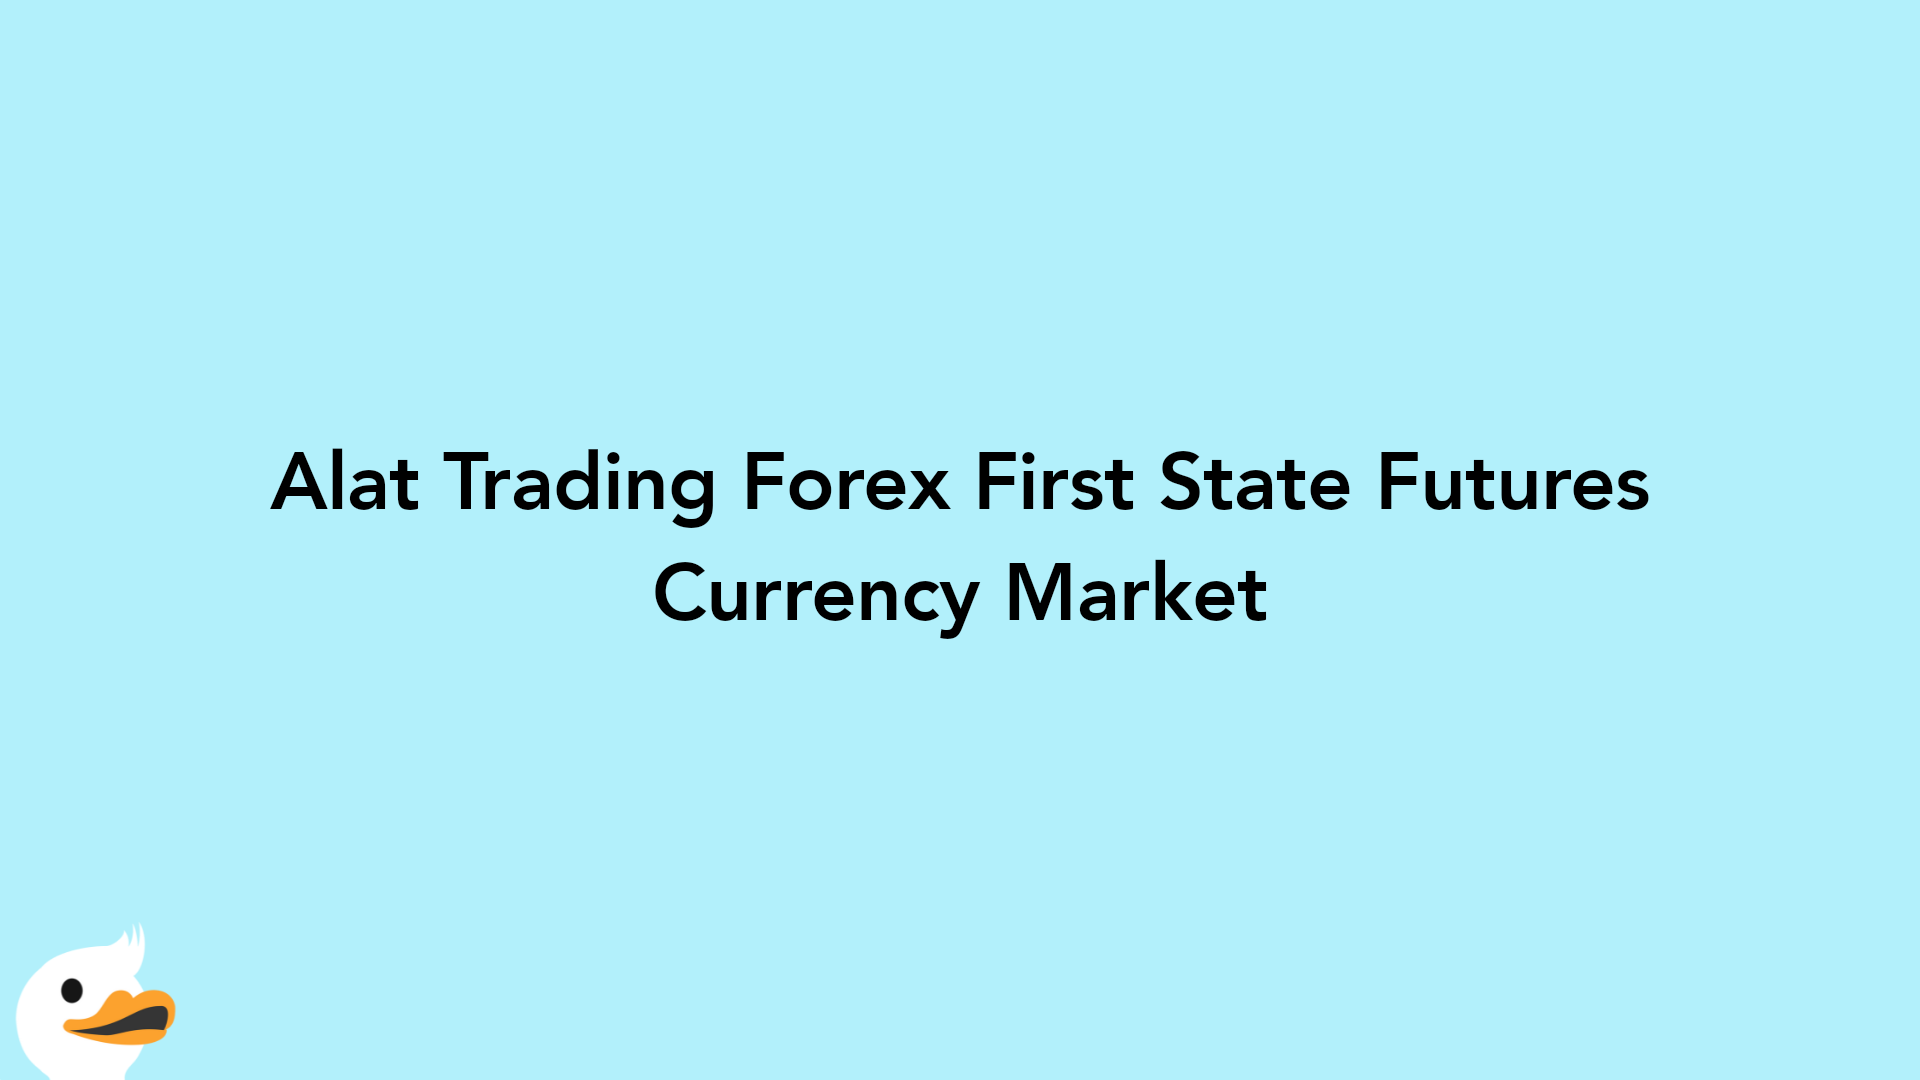 Alat Trading Forex First State Futures Currency Market